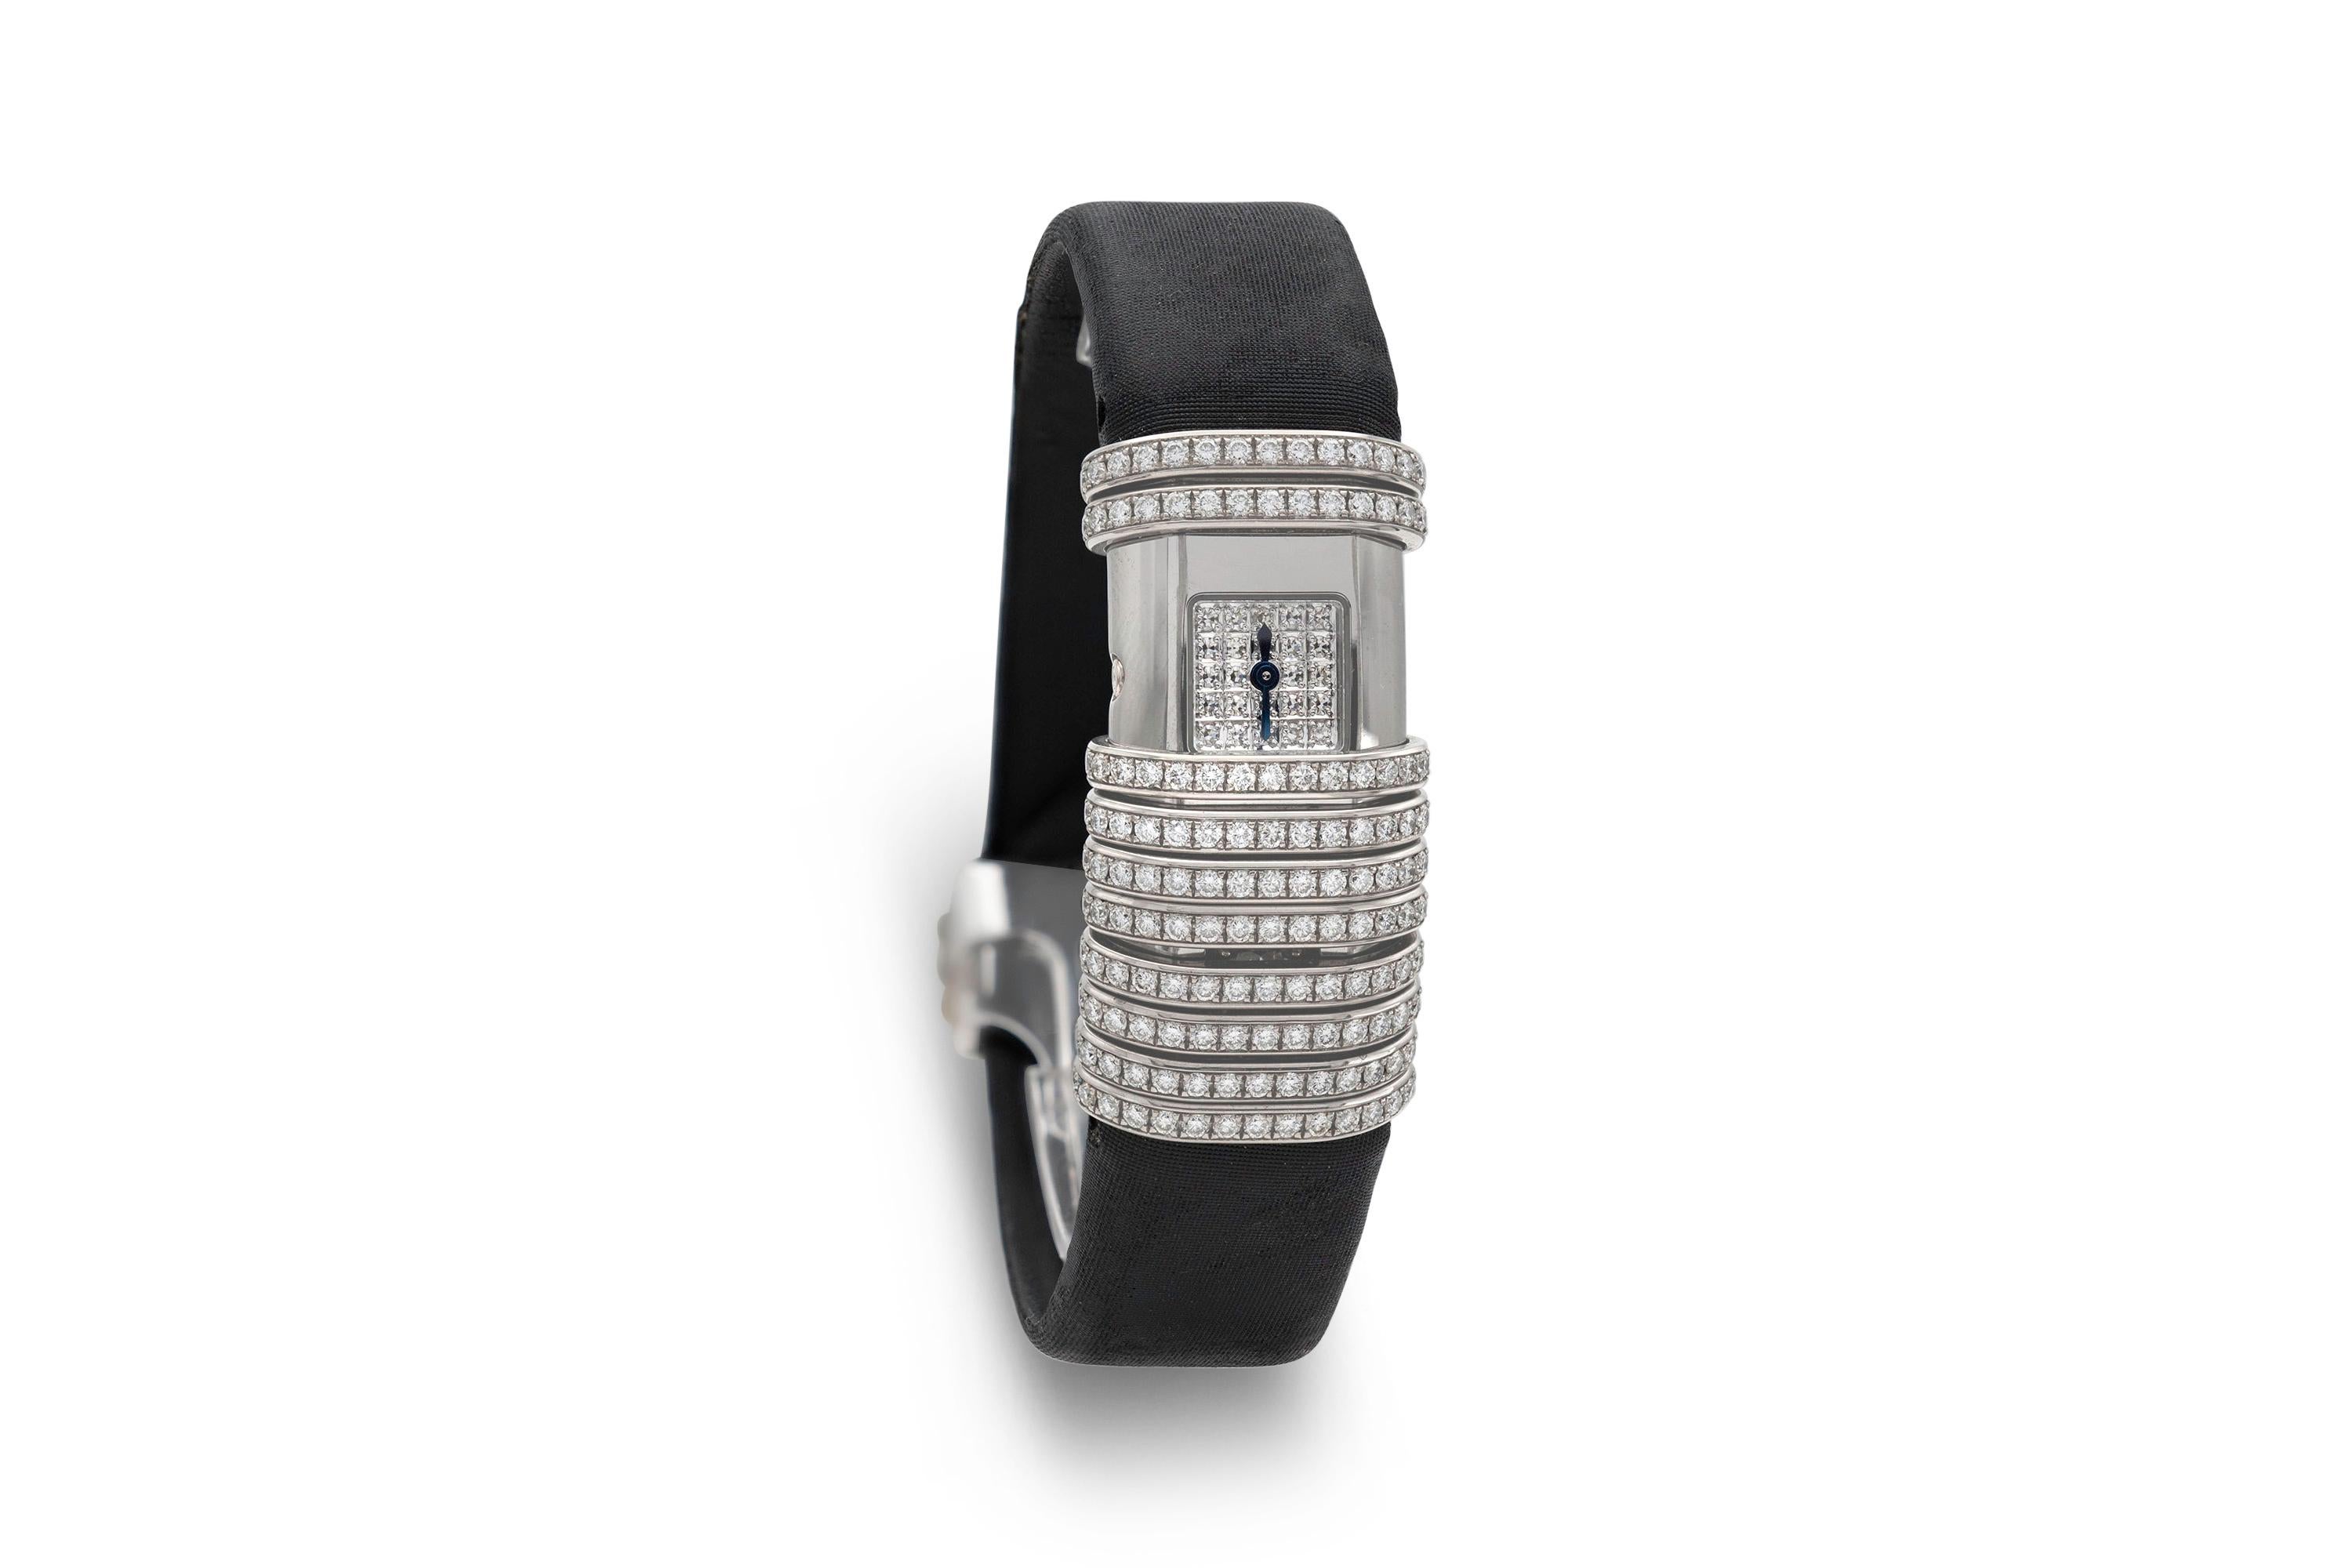 Finely crafted in 18k white gold and titanium.
The watch face features diamonds. 16mm
The watch features a 0.60 carat round brilliant cut diamond.
Swiss-made watch, water-resistant
Signed and numbered by Cartier